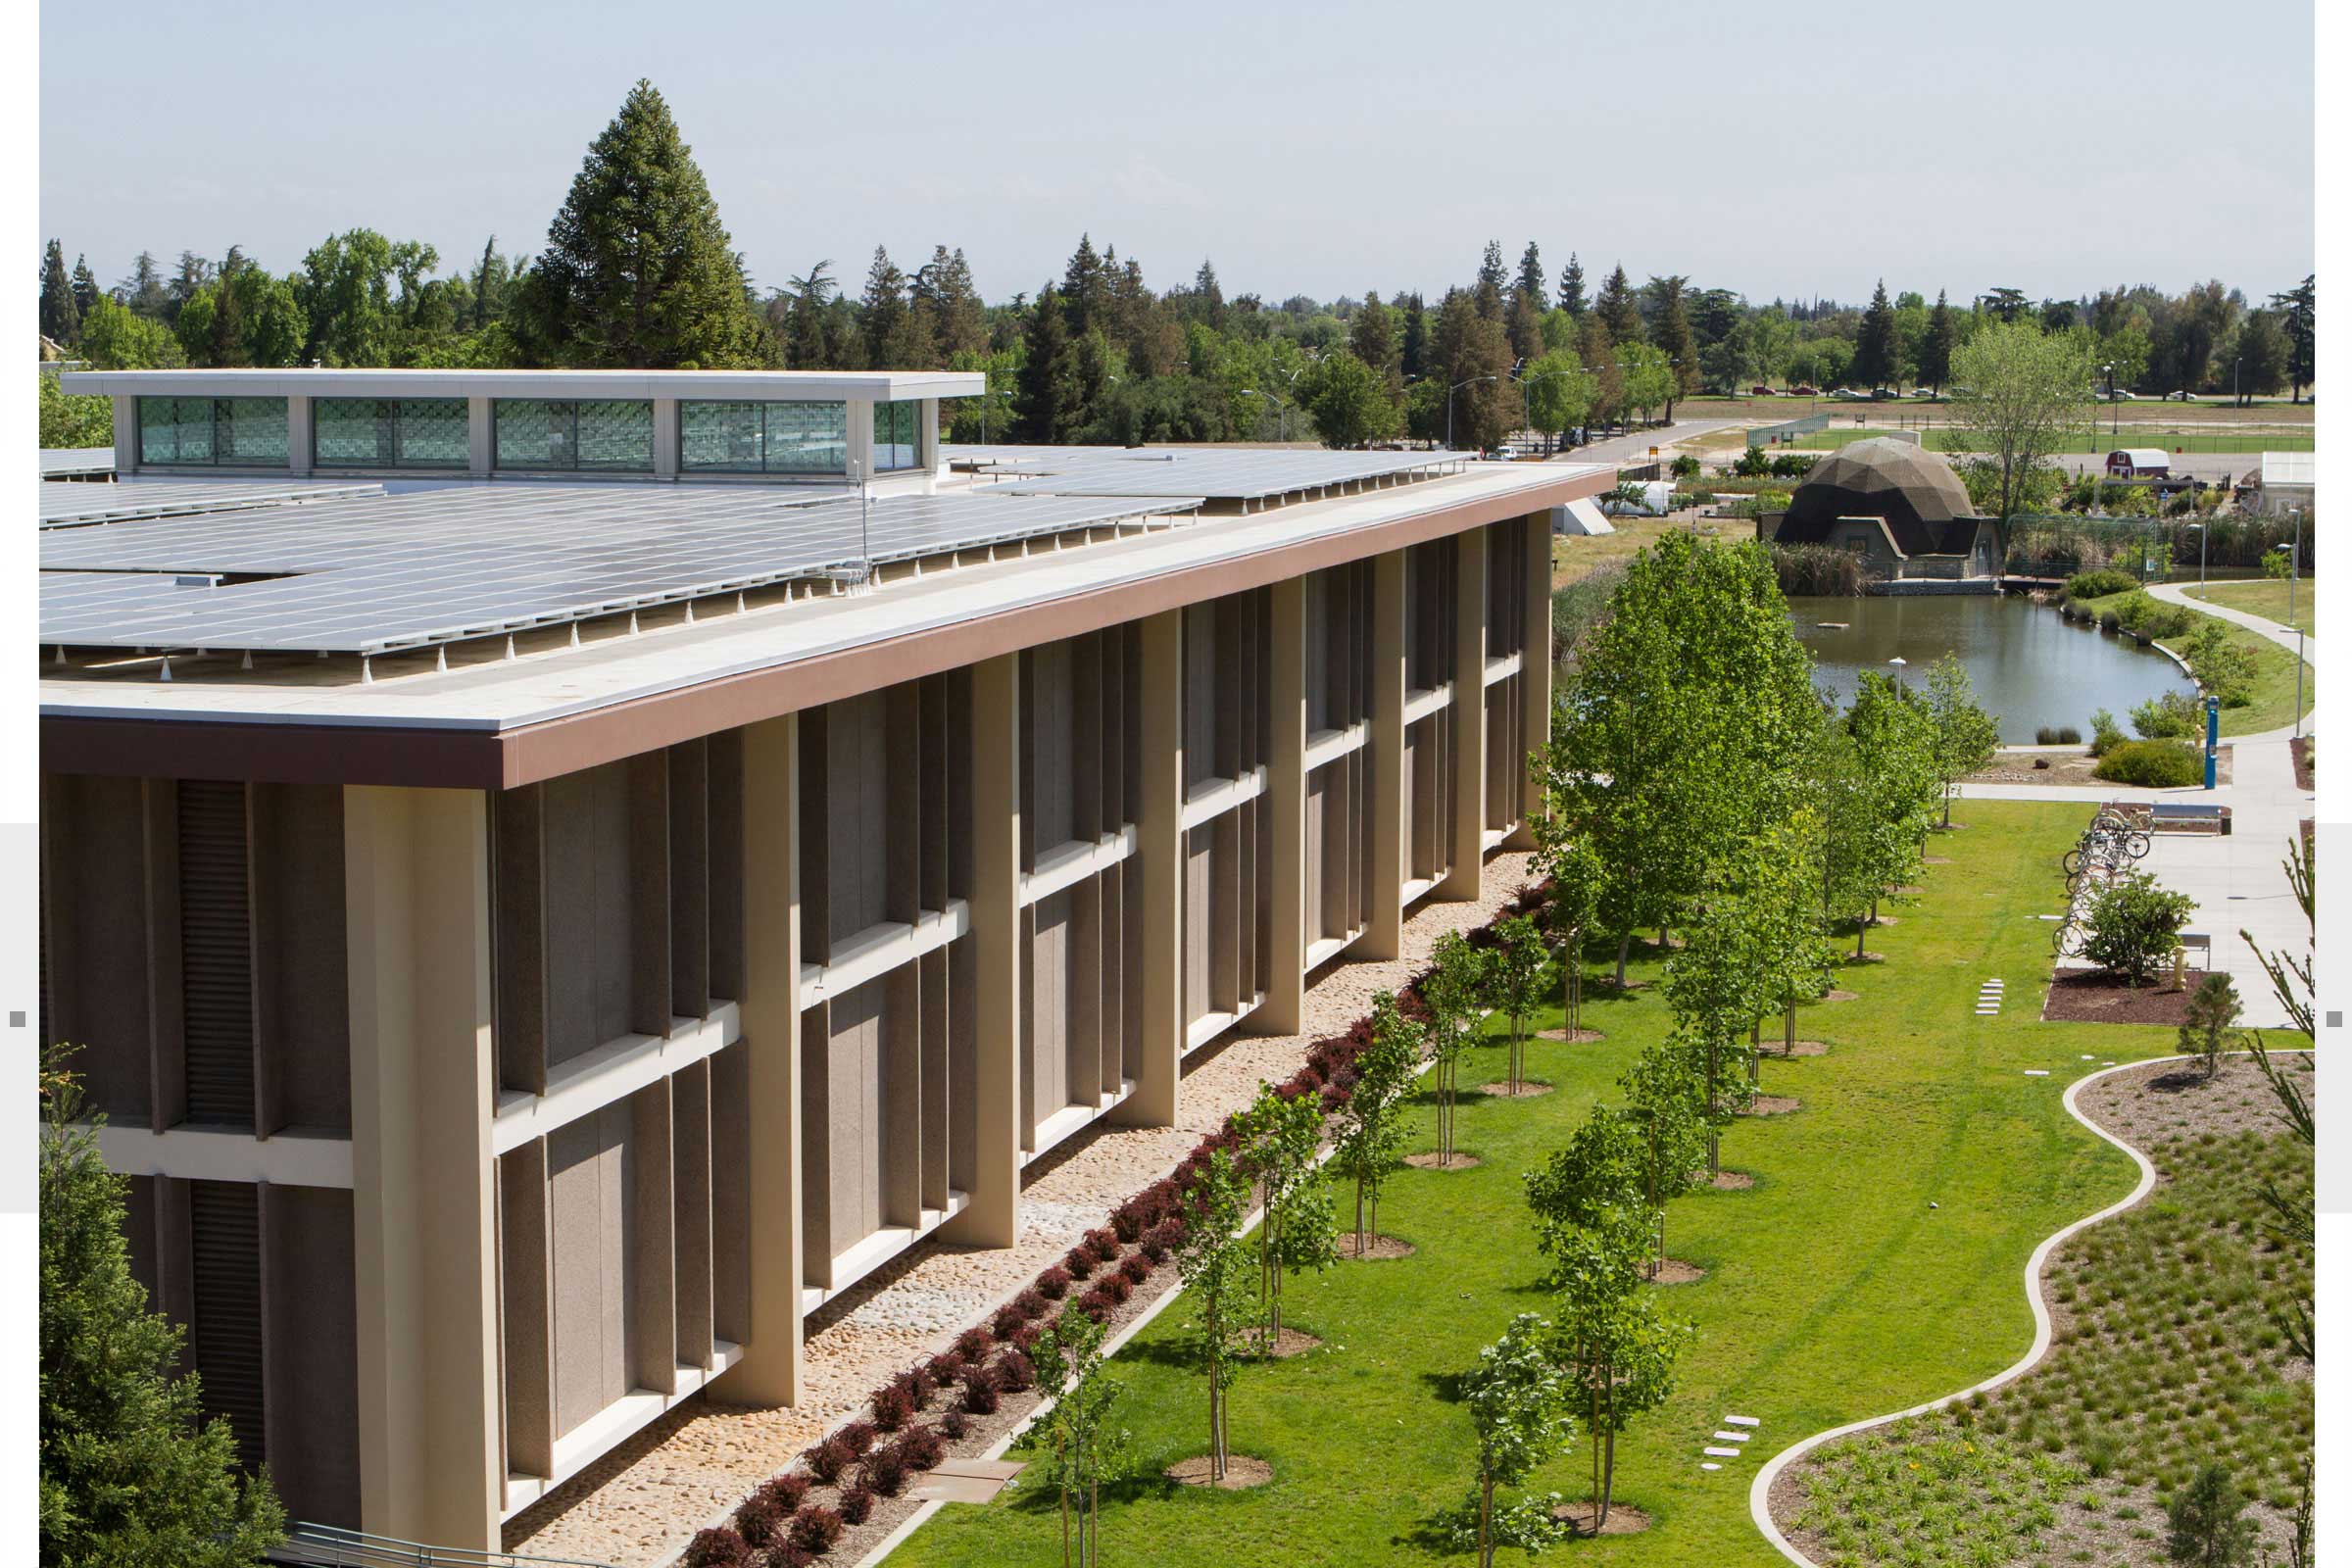 CSU exterior with trees and grassy area